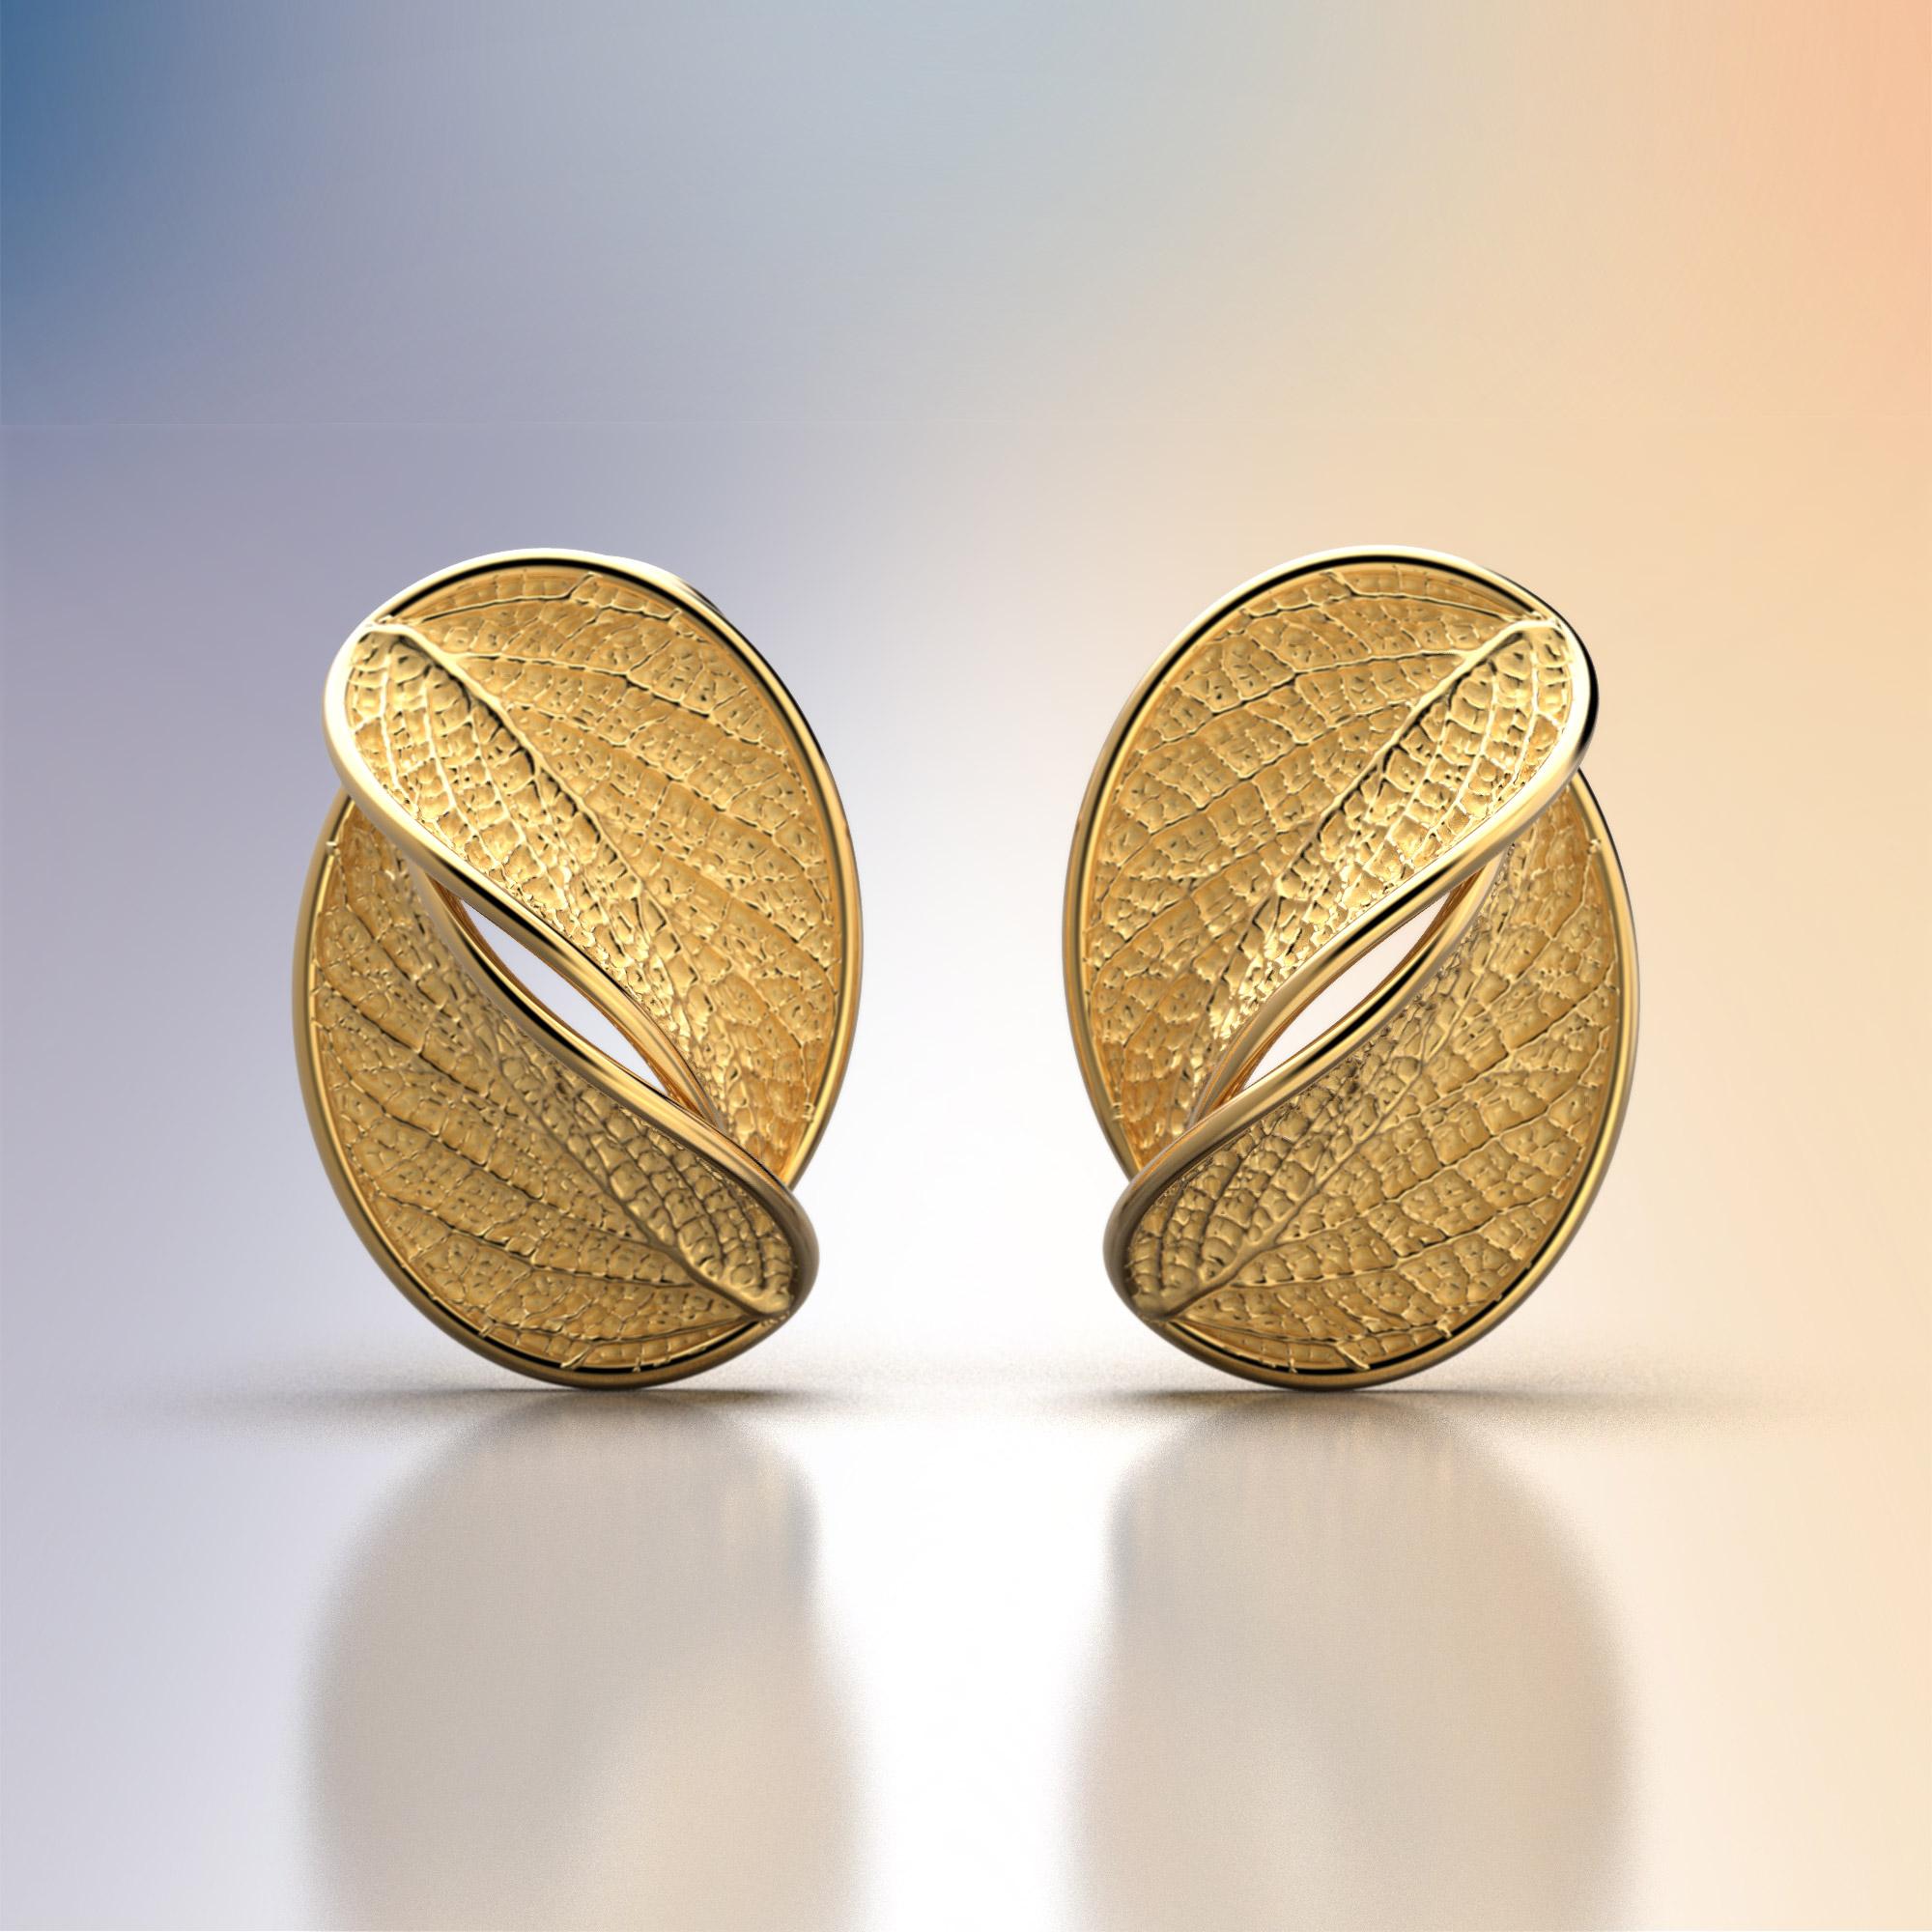 Made to order 14k Gold stud earrings with leaf design. Flora collection.
The earrings of the Flora collection have the shape of the ash leaf, a sacred tree in many cultures, a symbol of the sun and always used as a protection.
The earrings feature